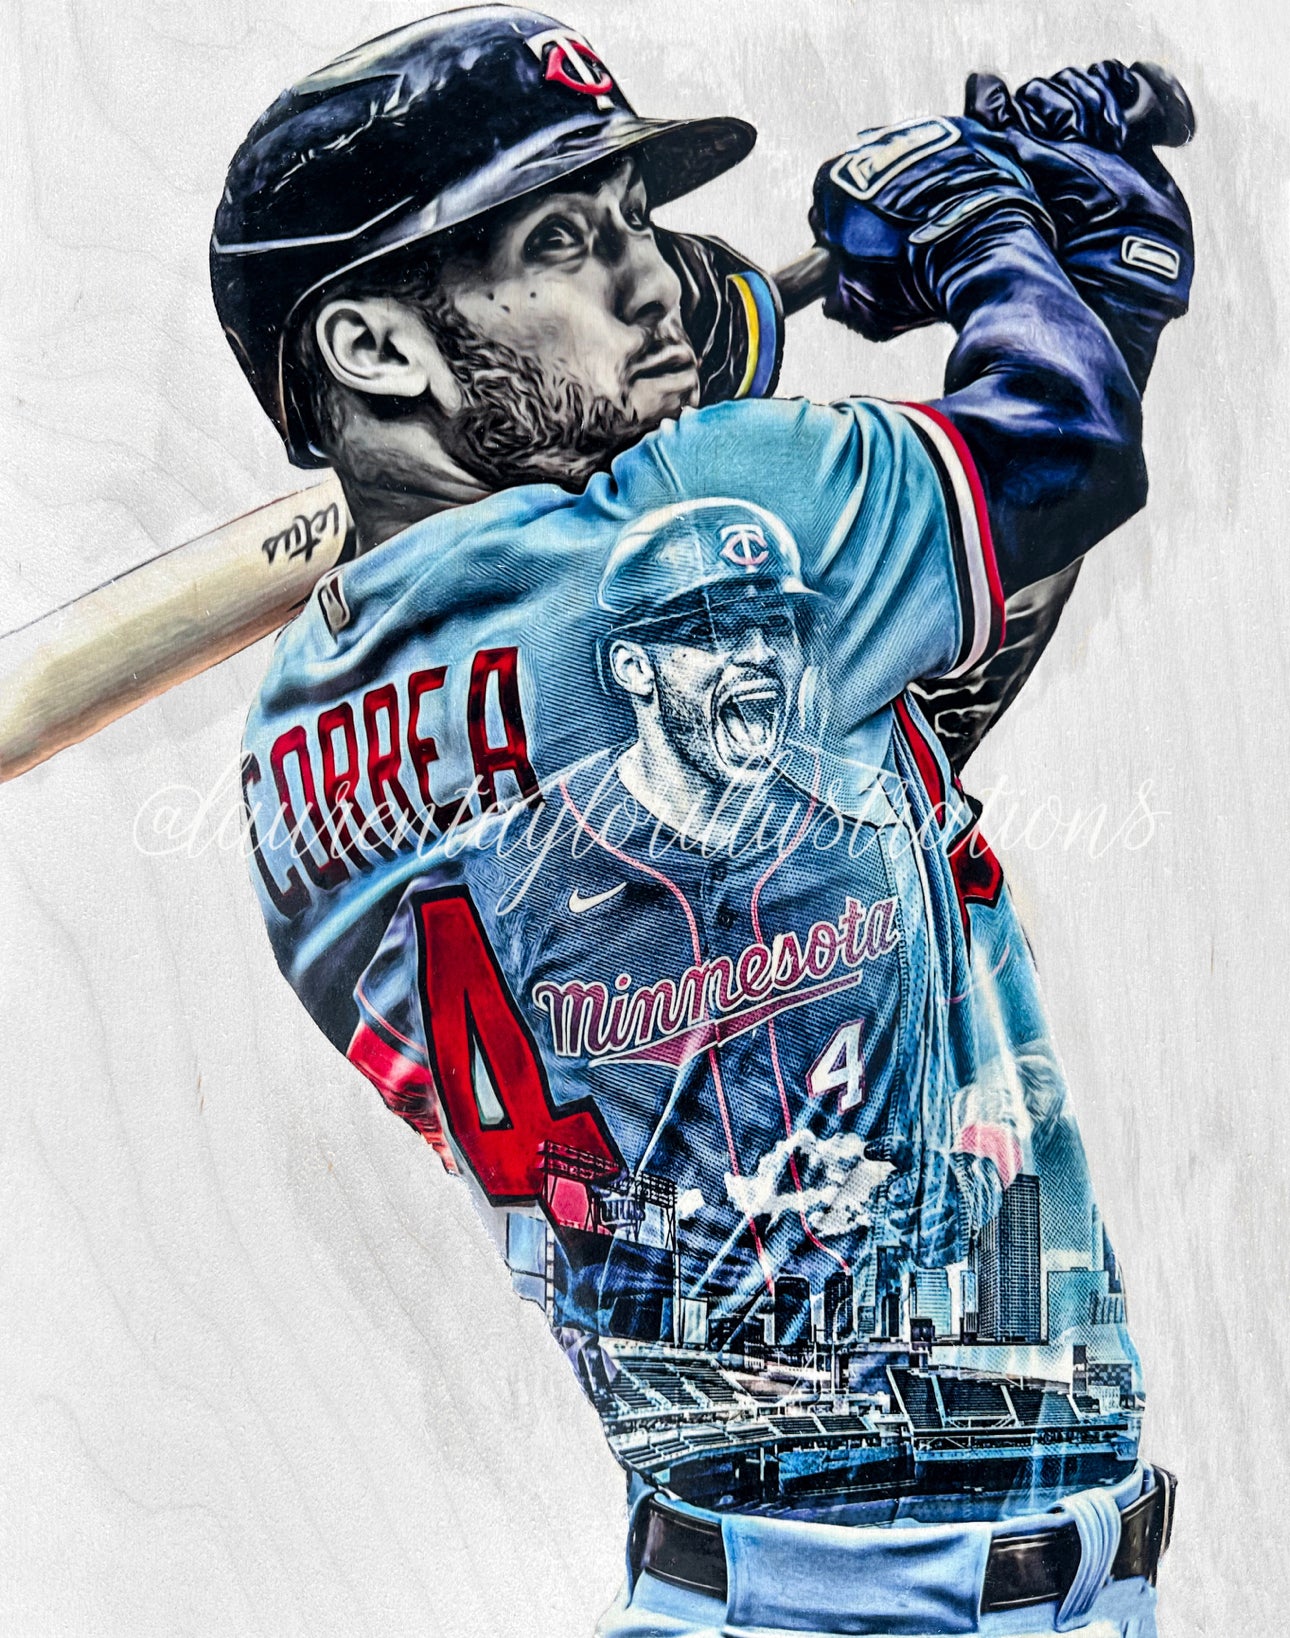 "C4" (Carlos Correa) Minnesota Twins - Officially Licensed MLB Print - Limited Release /500